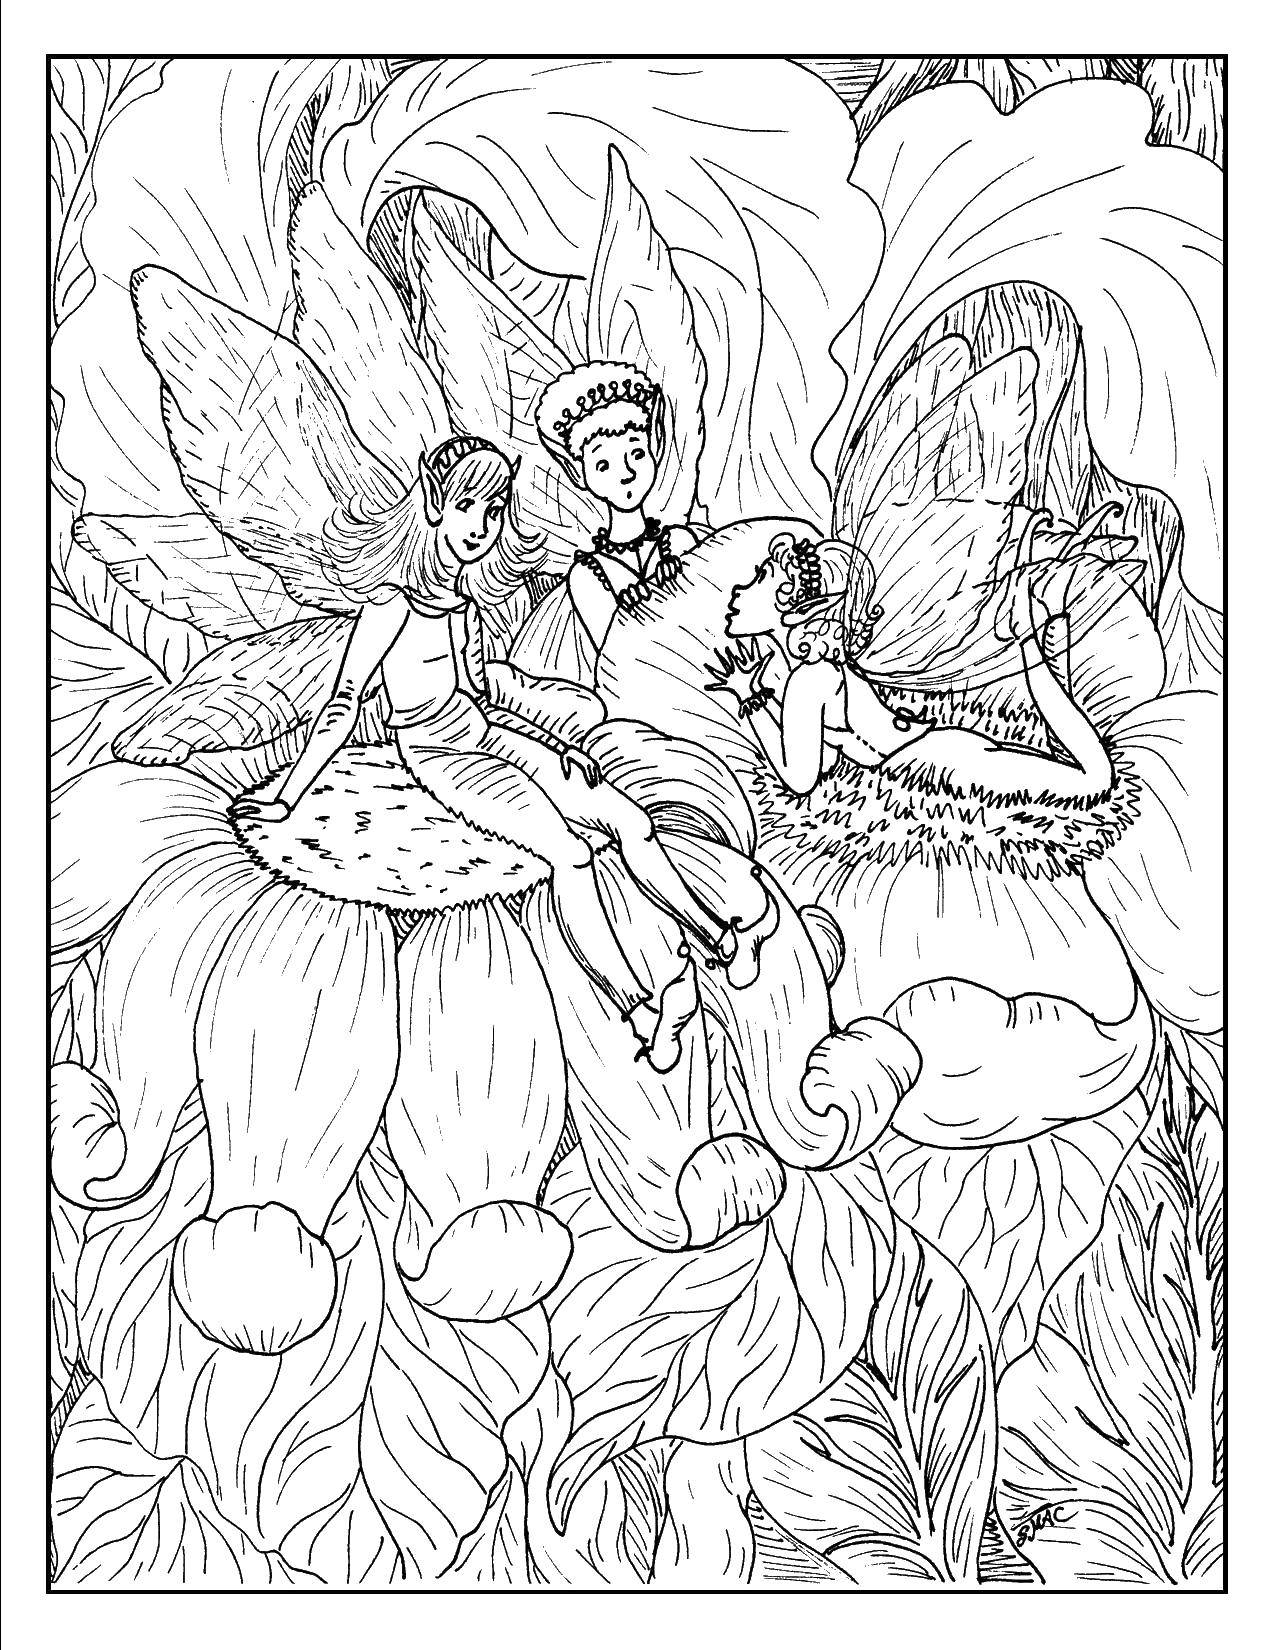 Coloring Little fairies. Category coloring pages for girls. Tags:  fairies. flowers.